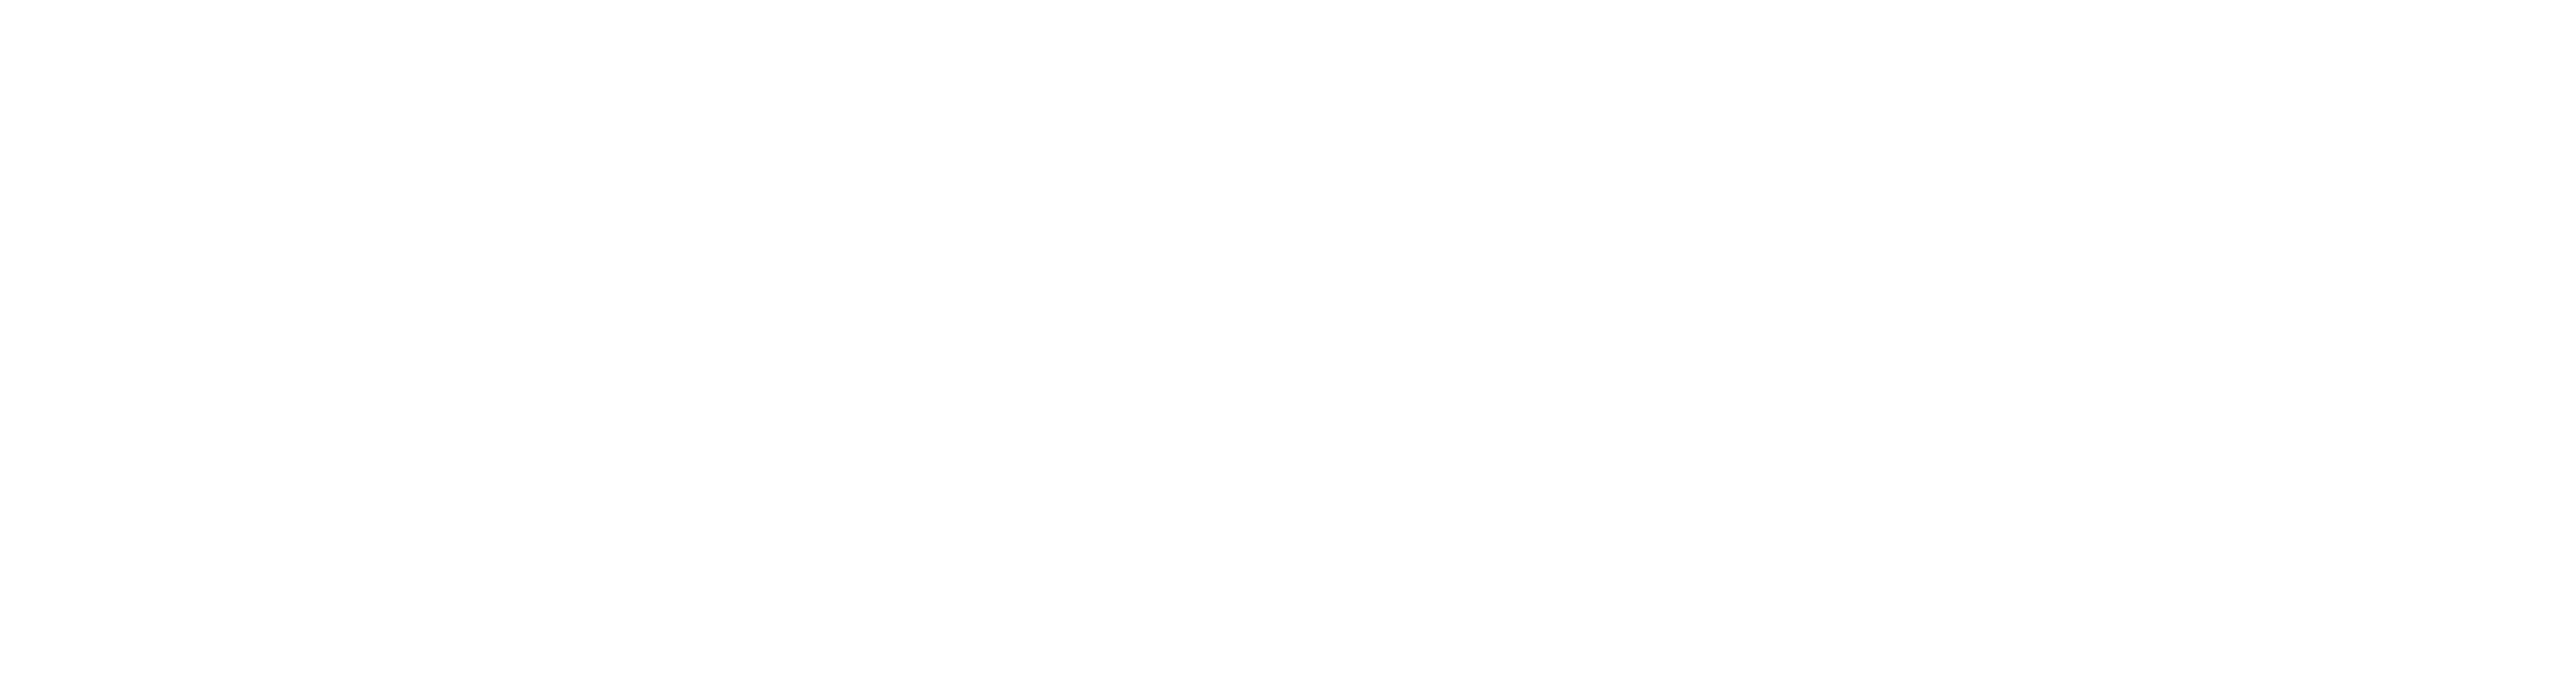 Church Job Finder for Employers